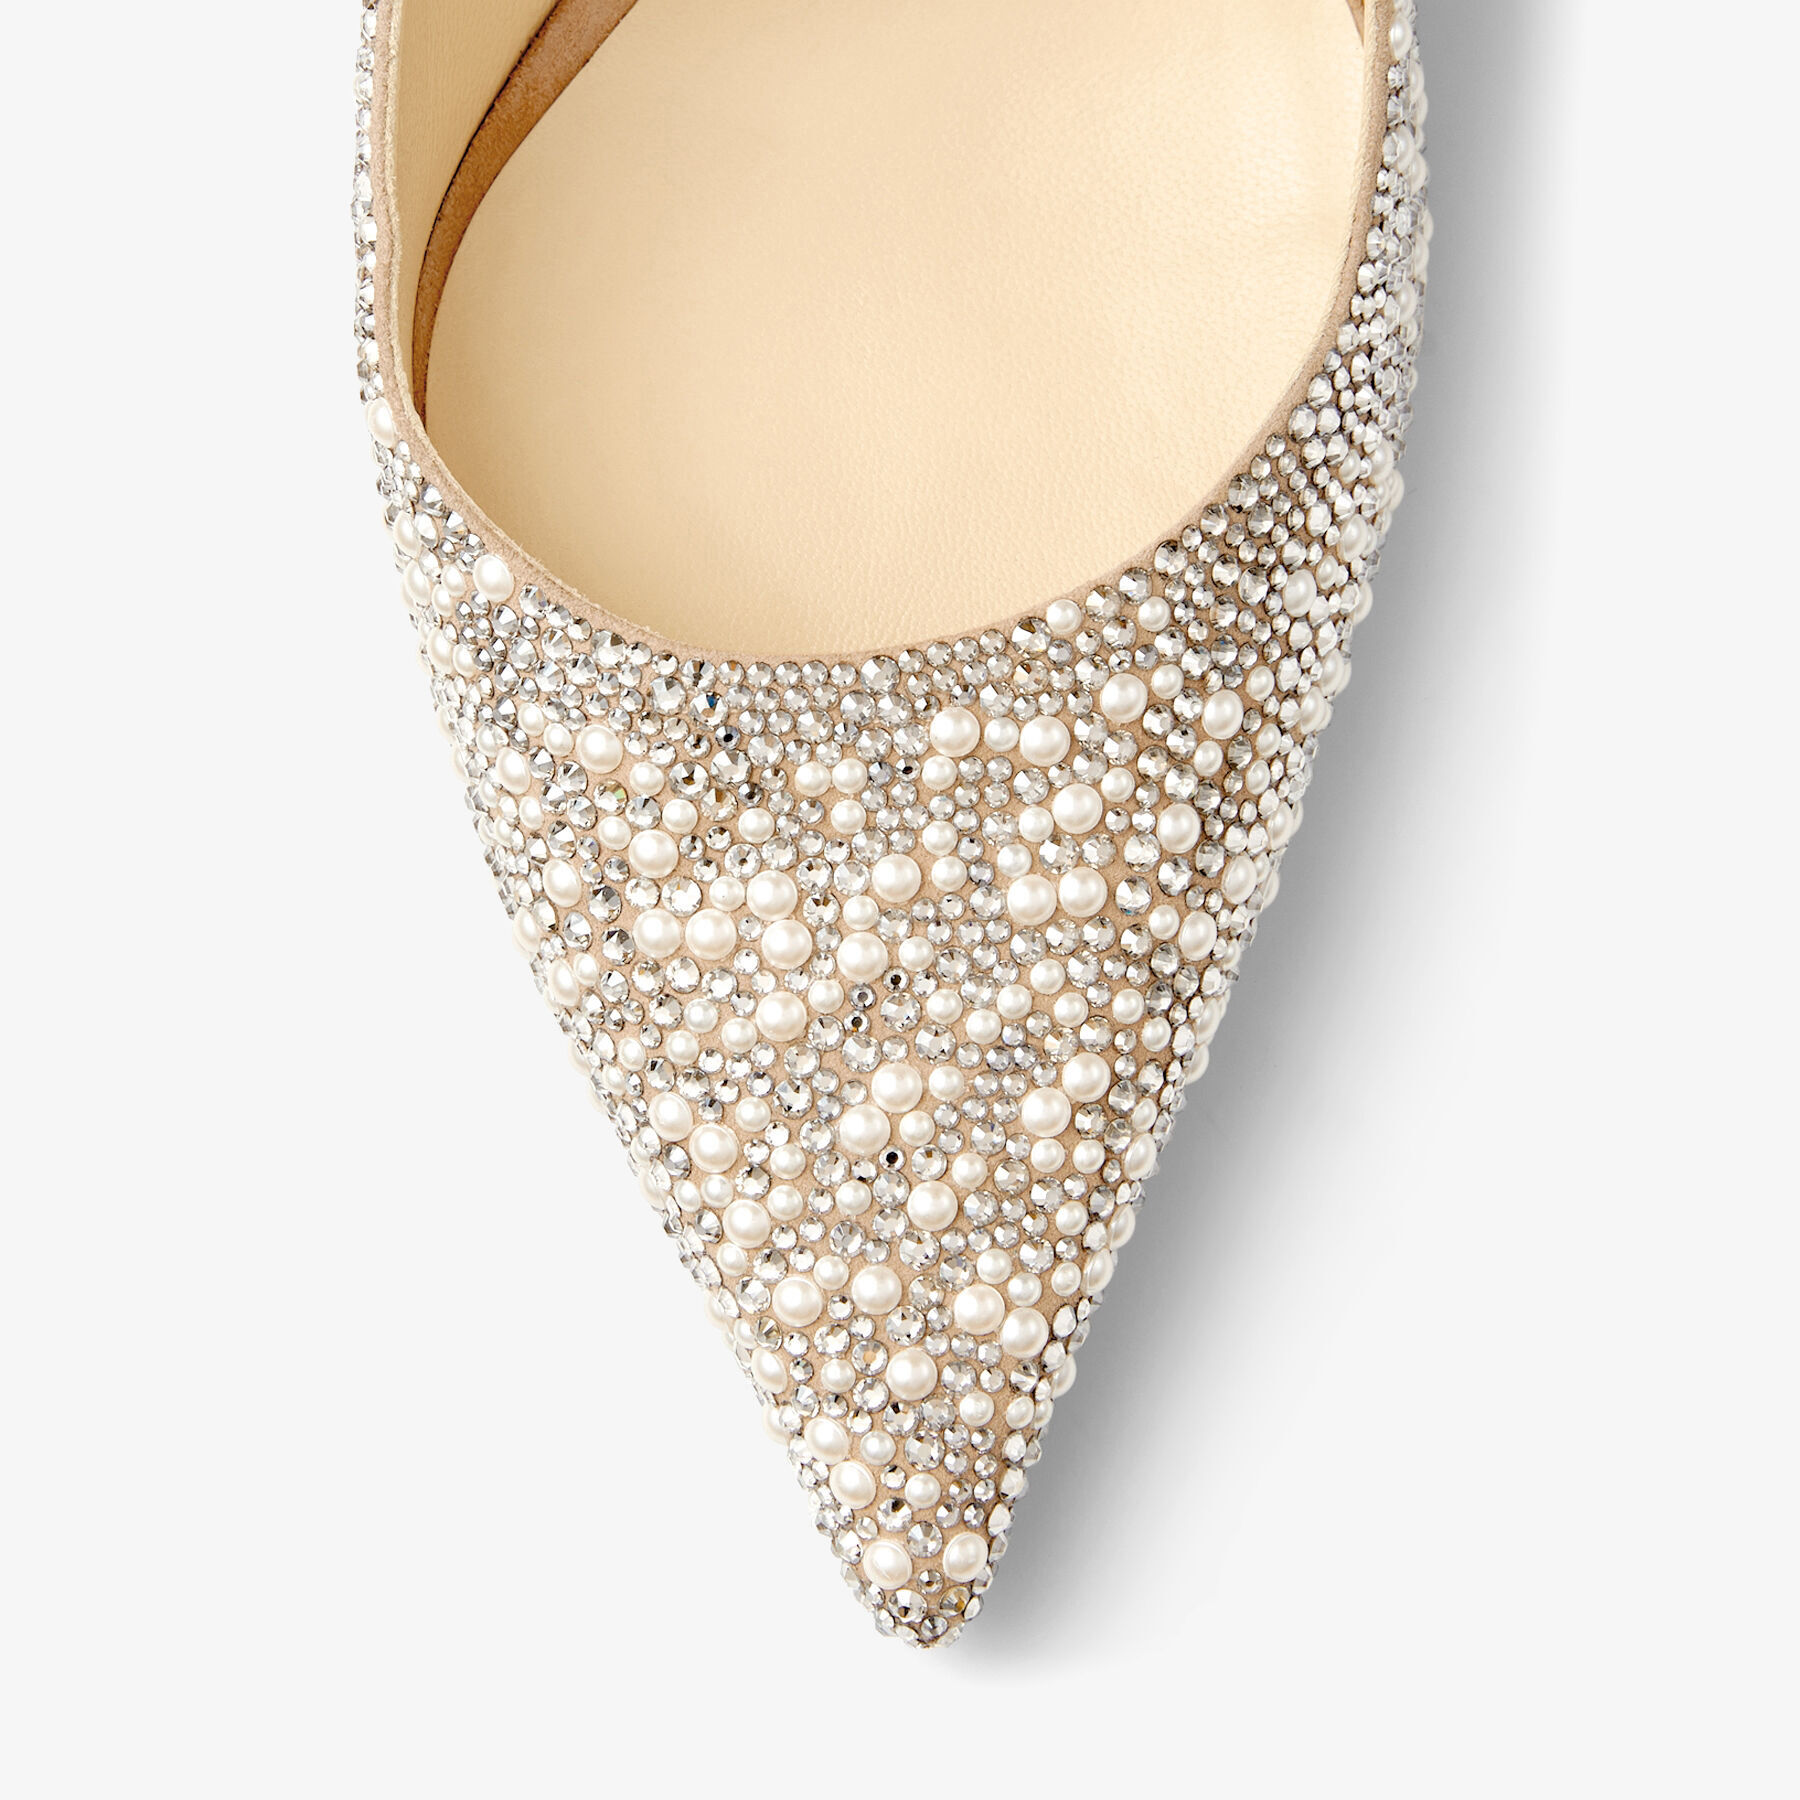 Ballet Pink Suede Mary Jane Pumps with Crystal and Pearl Embellishment ...